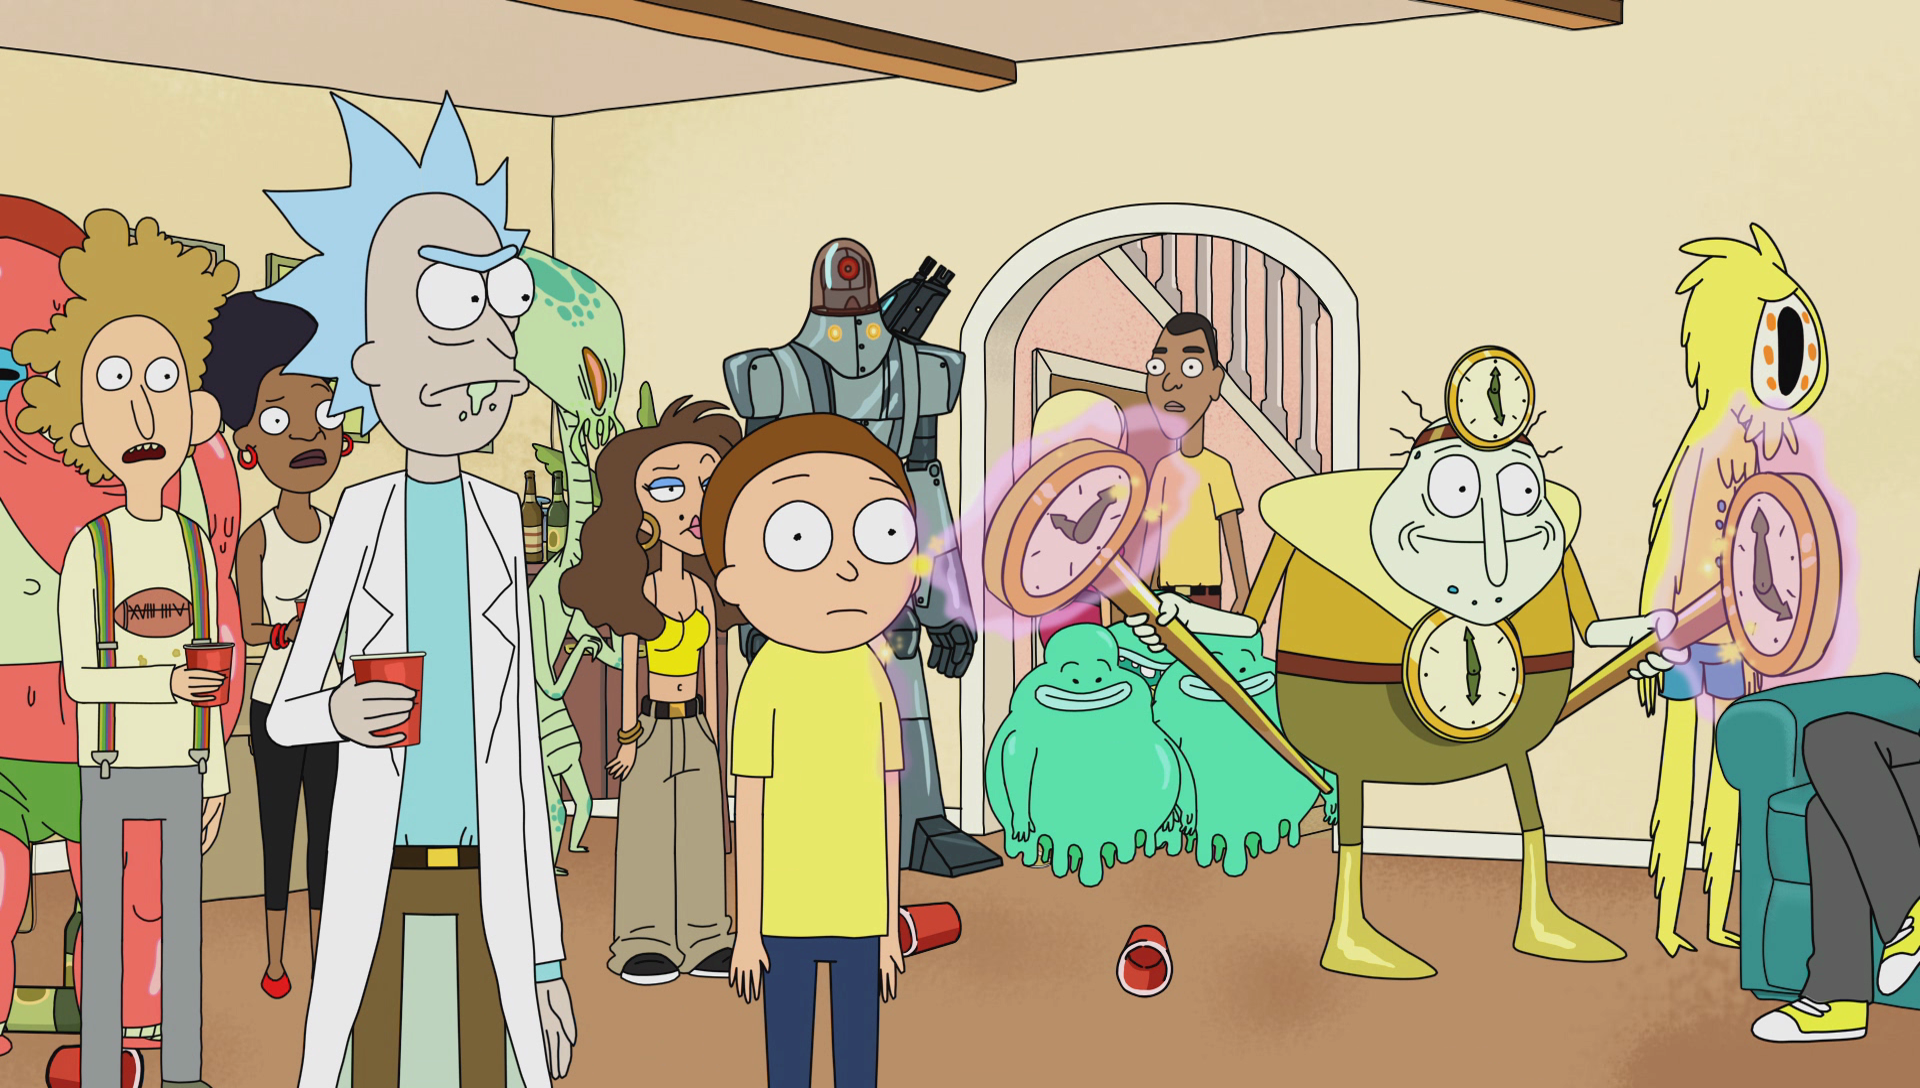 Image - S1e11 quit is slow mobius.png | Rick and Morty Wiki | FANDOM ...